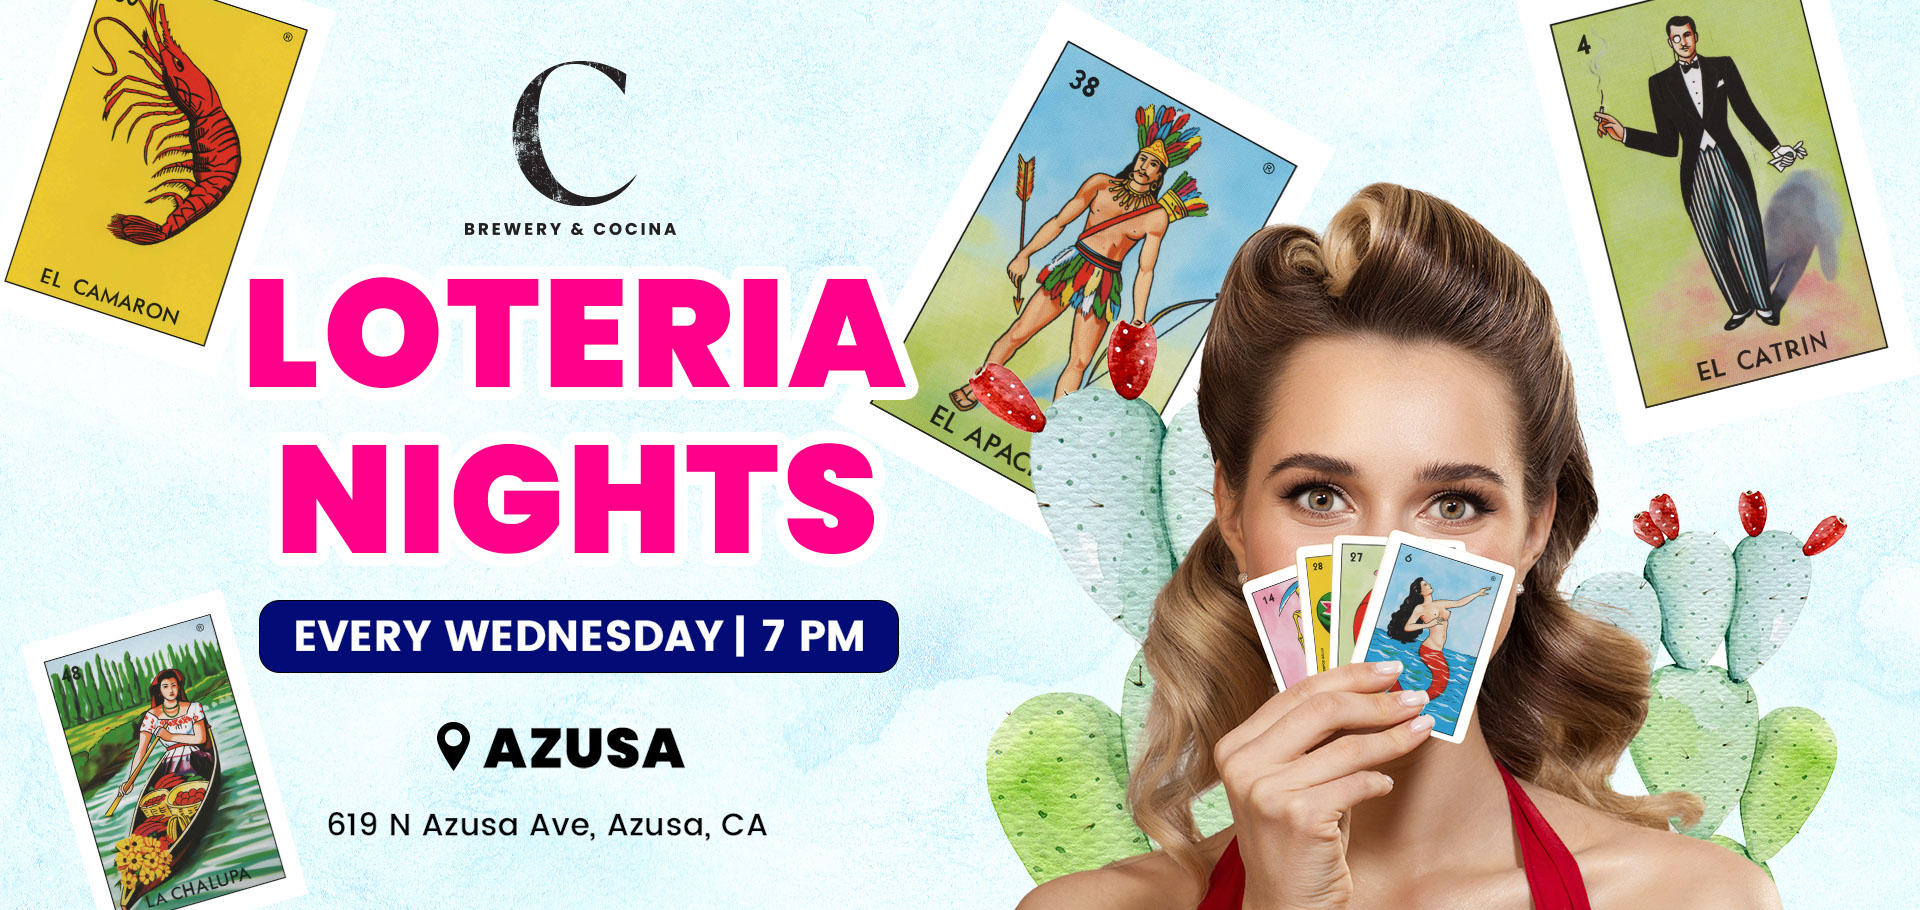 Loteria Nights - Every Wednesday | 7PM - Azusa Location Only